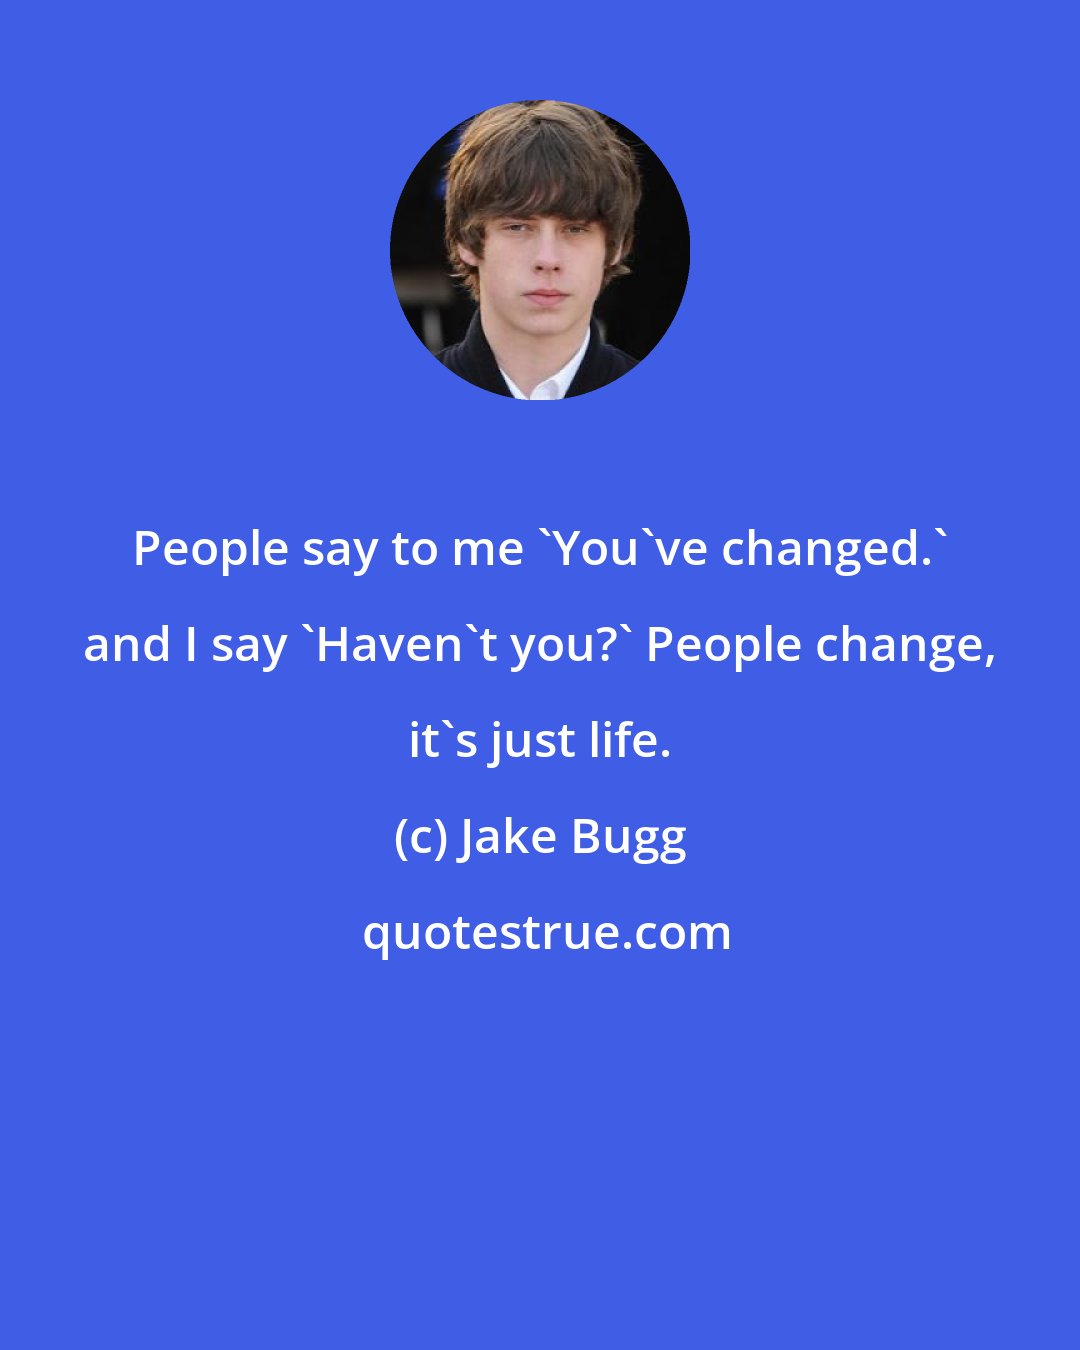 Jake Bugg: People say to me 'You've changed.' and I say 'Haven't you?' People change, it's just life.